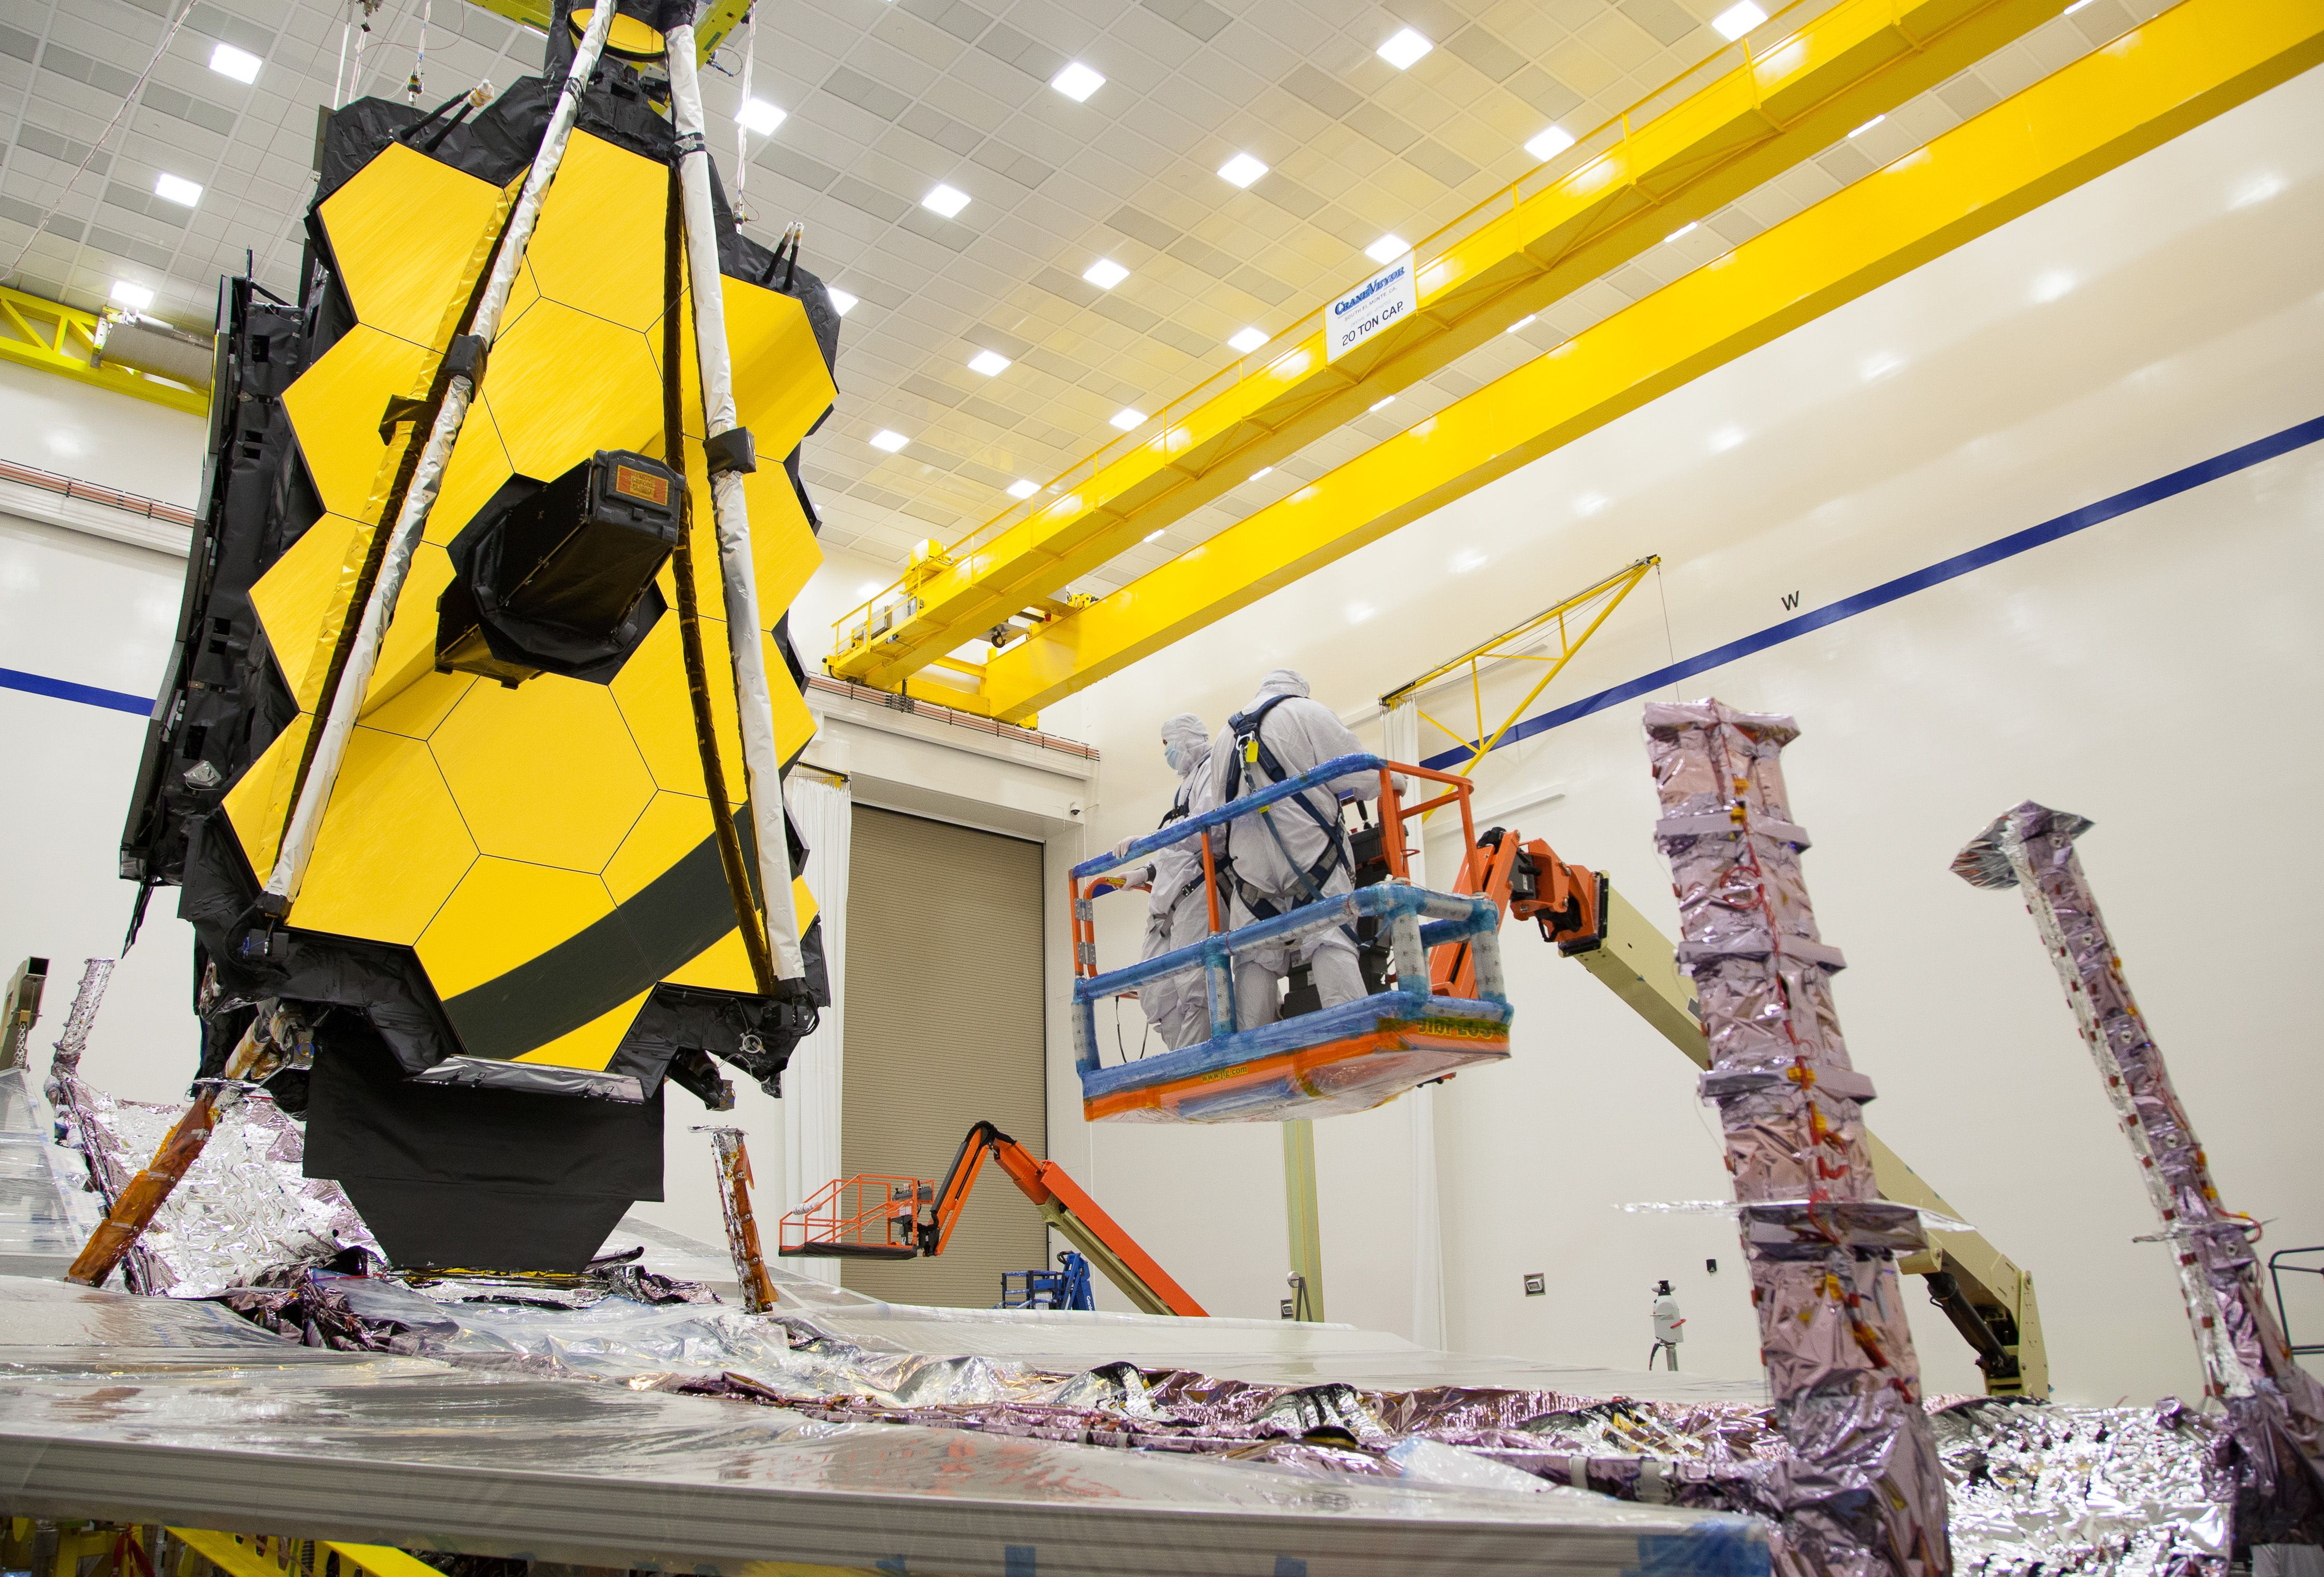 The James Webb Space Telescope's first full-color photographs released by NASA